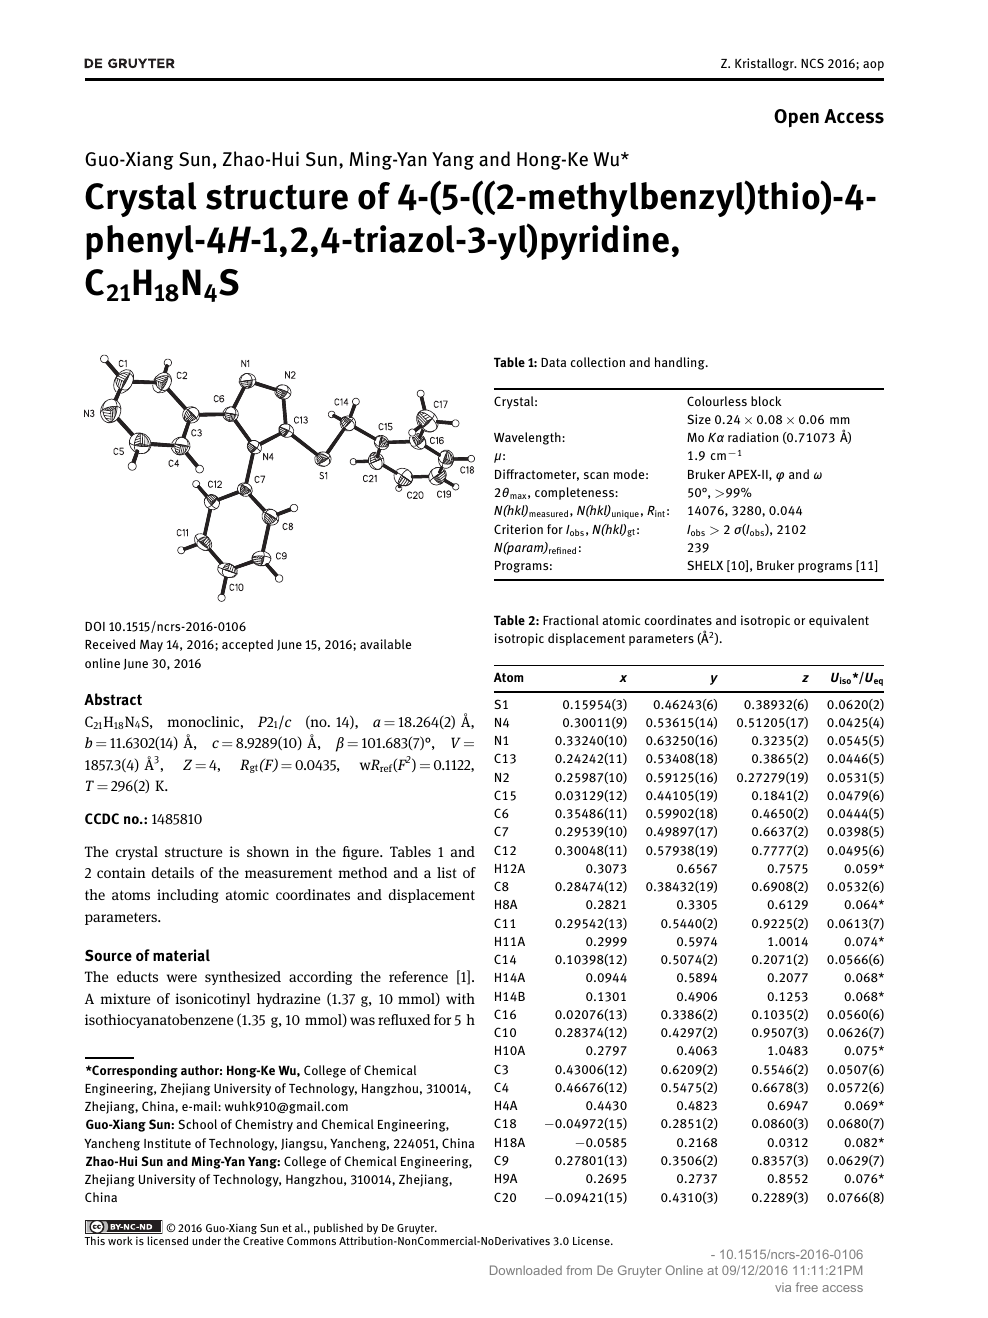 Crystal Structure Of 4 5 2 Methylbenzyl Thio 4 Phenyl 4h 1 2 4 Triazol 3 Yl Pyridine C21h18n4s Topic Of Research Paper In Chemical Sciences Download Scholarly Article Pdf And Read For Free On Cyberleninka Open Science Hub